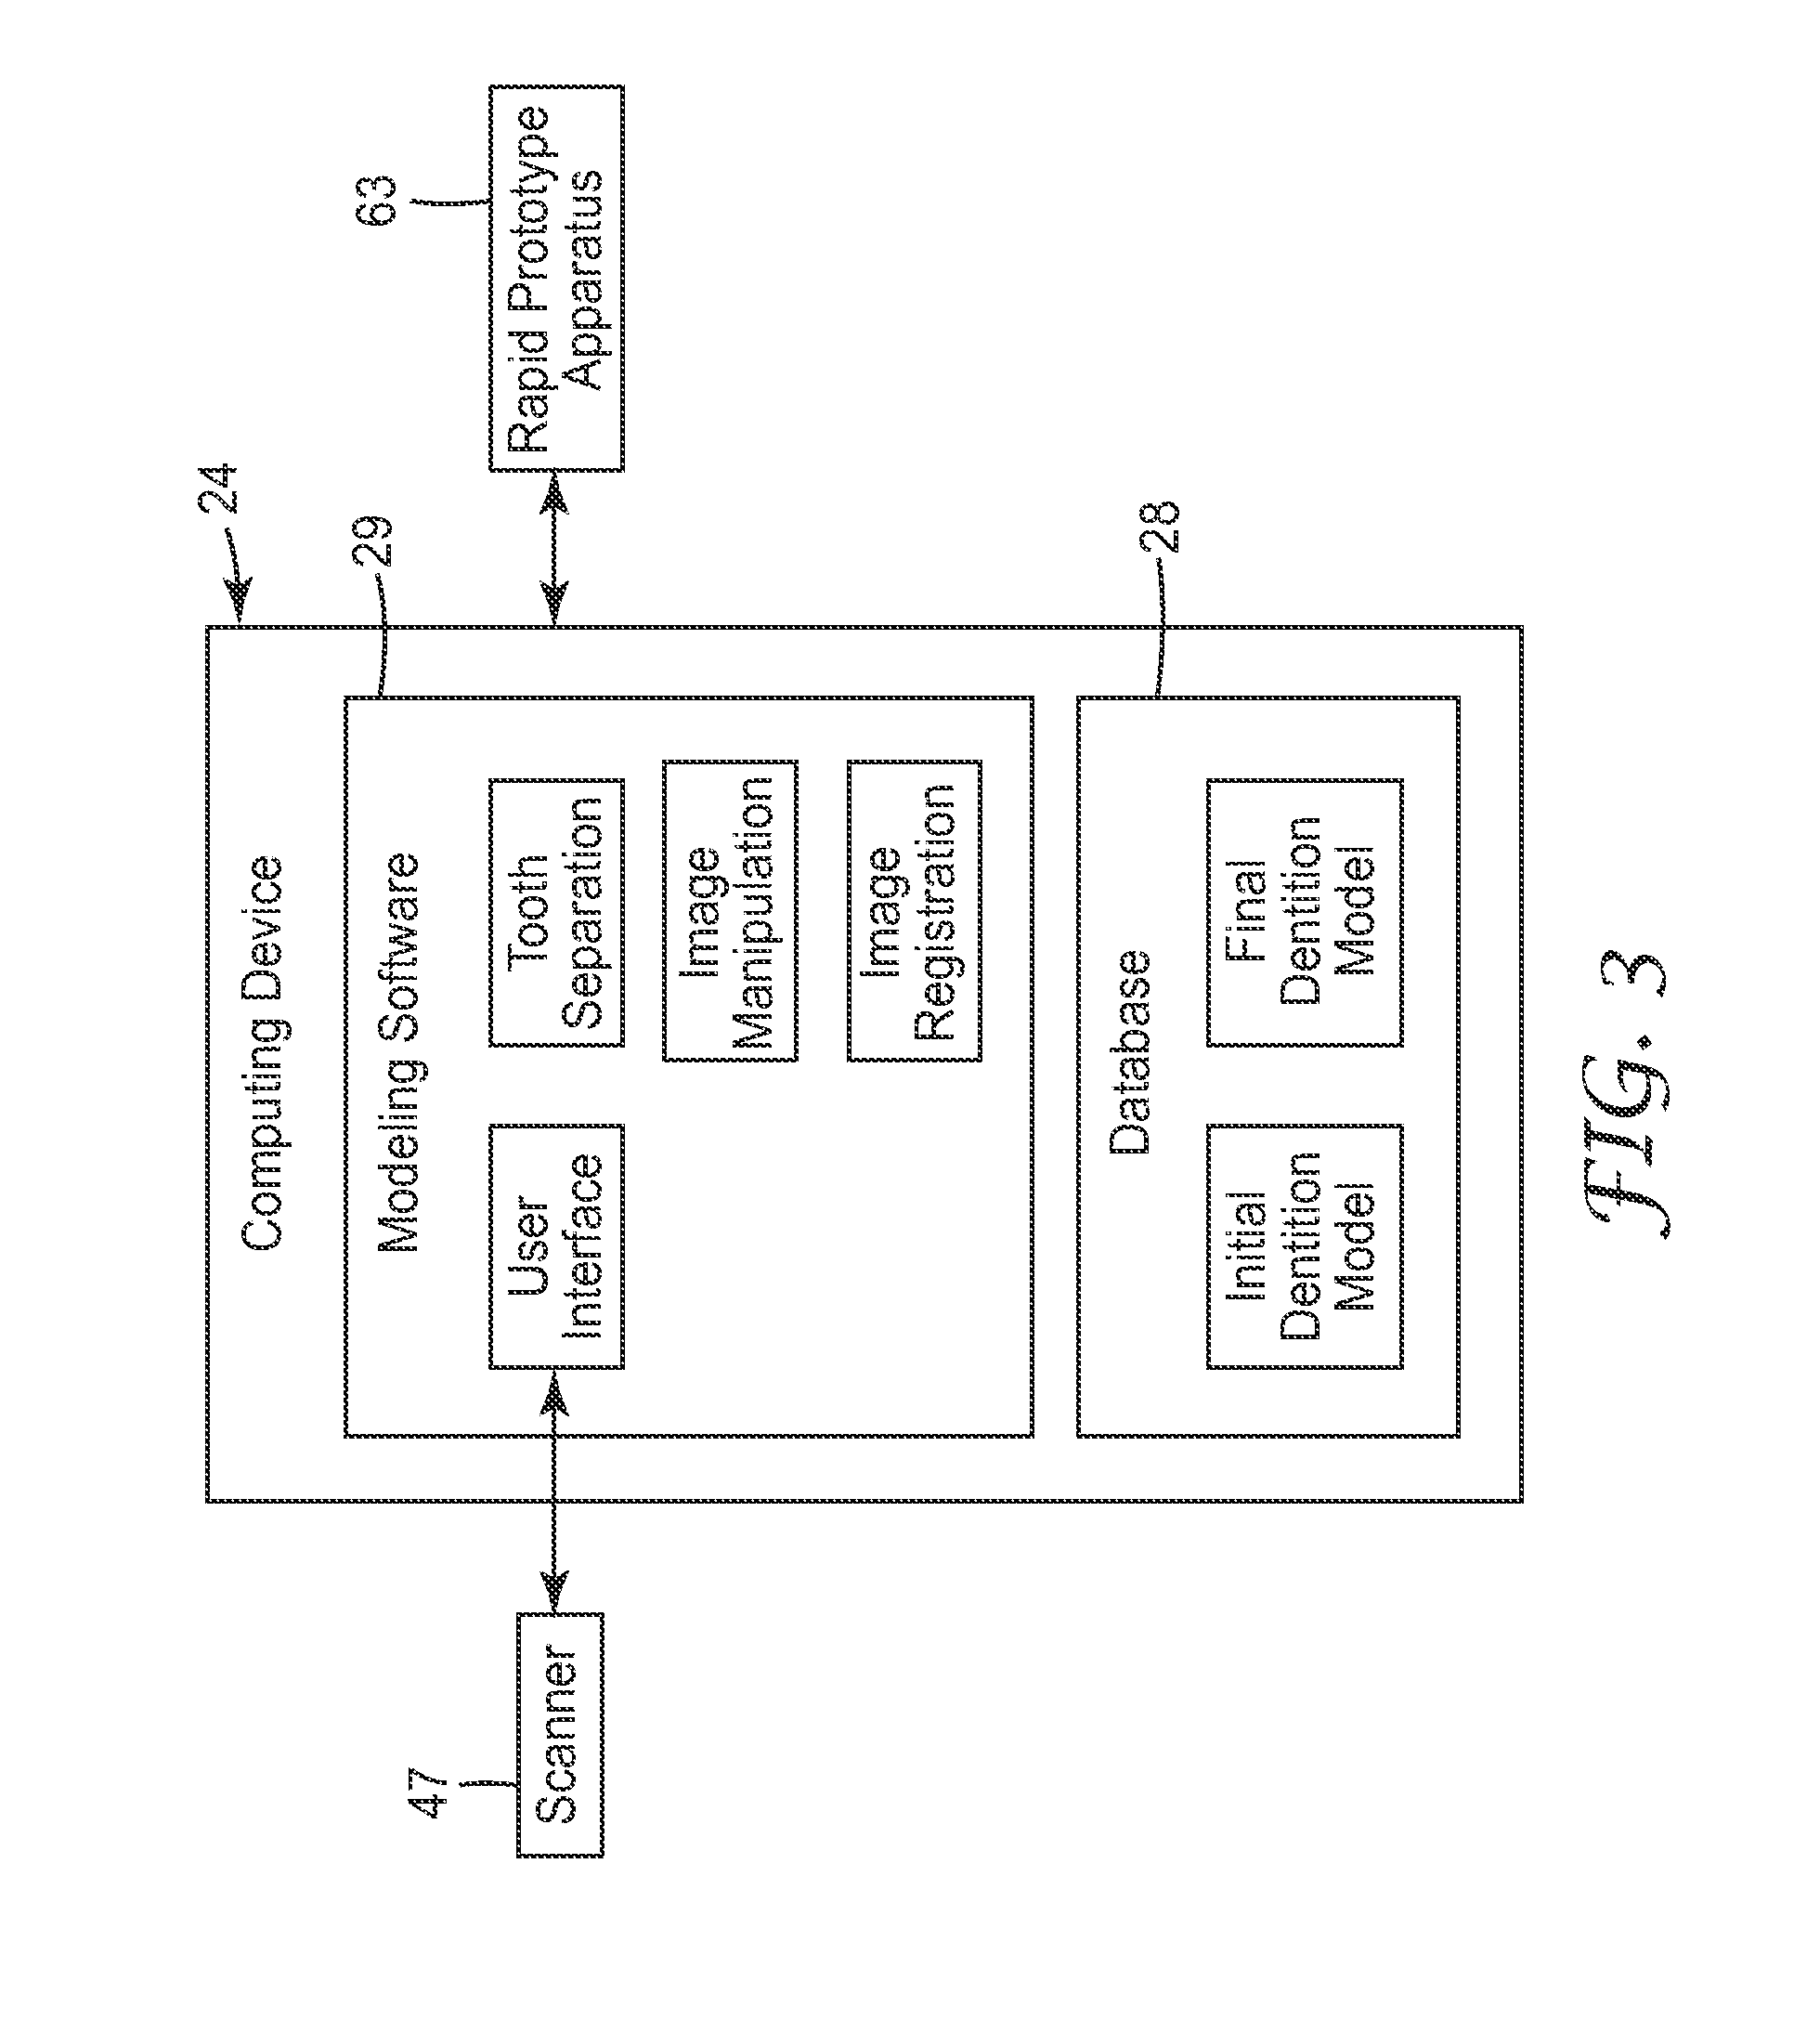 Methods of preparing a virtual dentition model and fabricating a dental retainer therefrom